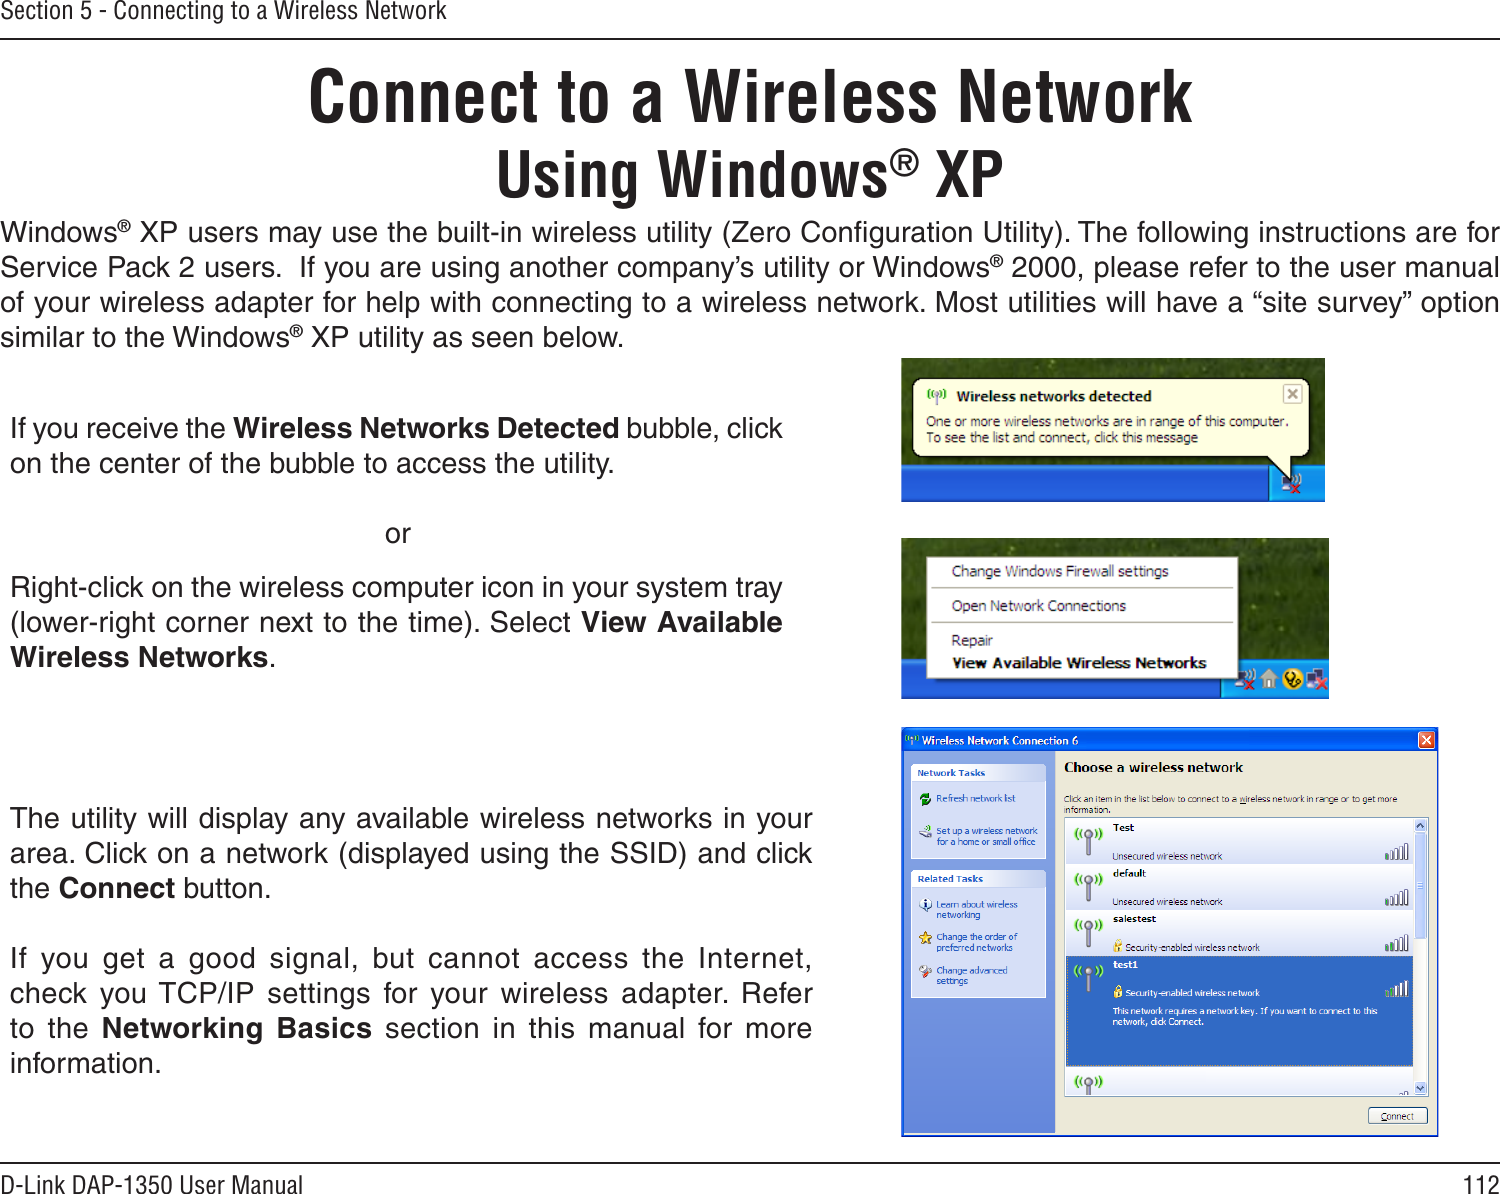 112D-Link DAP-1350 User ManualSection 5 - Connecting to a Wireless NetworkConnect to a Wireless NetworkUsing Windows® XPWindows® XP users may use the built-in wireless utility (Zero Conﬁguration Utility). The following instructions are for Service Pack 2 users.  If you are using another company’s utility or Windows® 2000, please refer to the user manual of your wireless adapter for help with connecting to a wireless network. Most utilities will have a “site survey” option similar to the Windows® XP utility as seen below.Right-click on the wireless computer icon in your system tray (lower-right corner next to the time). Select View Available Wireless Networks.If you receive the Wireless Networks Detected bubble, click on the center of the bubble to access the utility.     orThe utility will display any available wireless networks in your area. Click on a network (displayed using the SSID) and click the Connect button.If  you  get  a  good  signal,  but  cannot  access  the  Internet, check  you TCP/IP  settings  for  your  wireless  adapter.  Refer to  the  Networking  Basics  section  in  this  manual  for  more information.